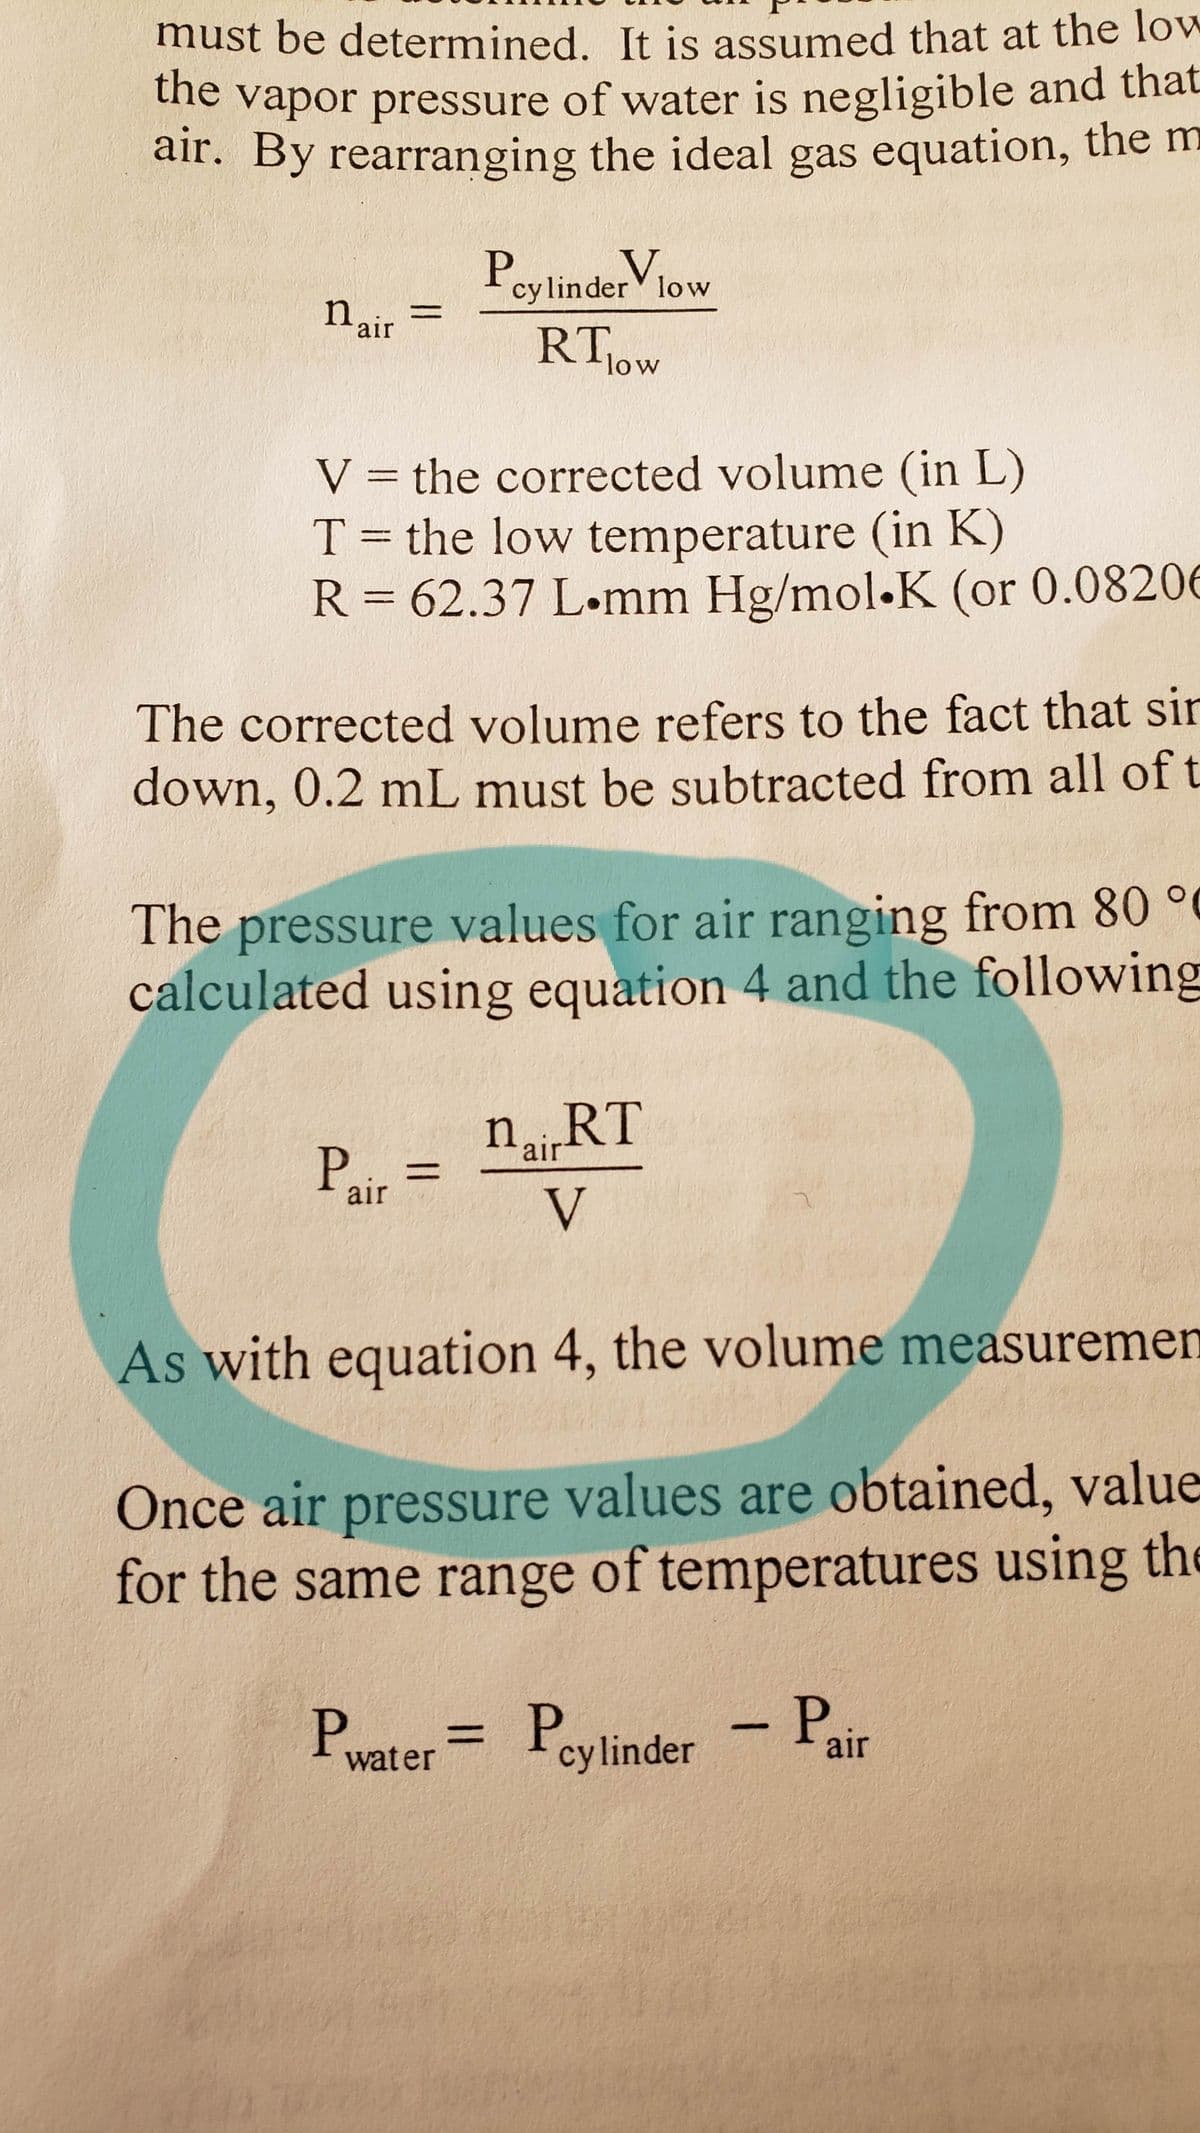 must be determined. It is assumed that at the loW
he Vapor pressure of water is negligible and that
air. By rearranging the ideal gas equation, the m
V
Icylinder low
n air
RT1OW
low
V = the corrected volume (in L)
T = the low temperature (in K)
R = 62.37 L-mm Hg/mol.K (or 0.08206
The corrected volume refers to the fact that sir
down, 0.2 mL must be subtracted from all of t
The pressure values for air ranging from 80 °
calculated using equation 4 and the following
nRT
%3D
air
V
As with equation 4, the volume measuremen
Once air pressure values are obtained, value
for the same range of temperatures using the
Prater= P
P.
- Pair
cylinder
